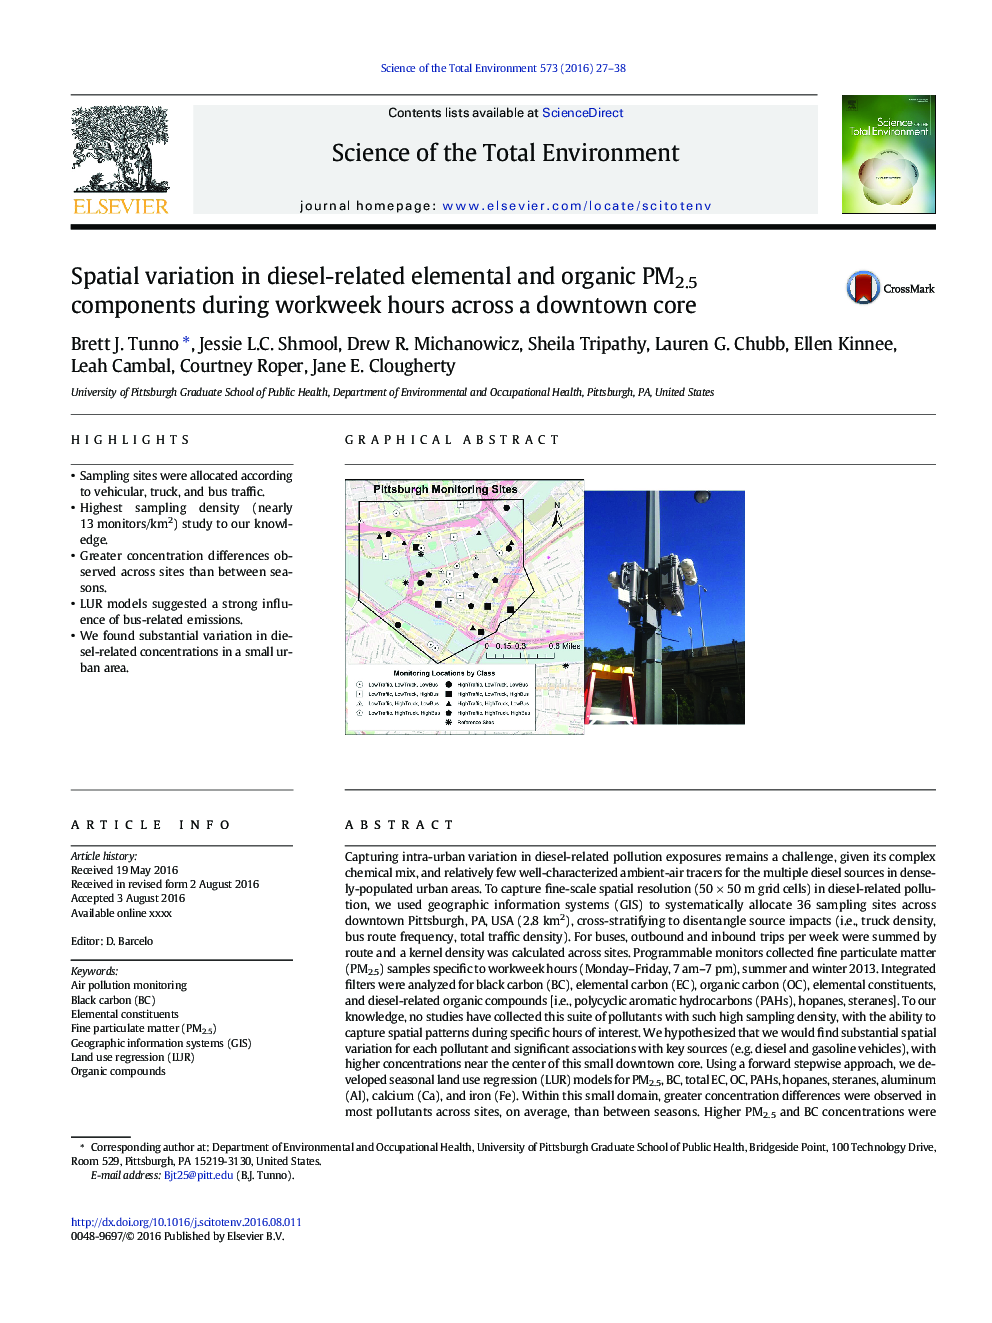 Spatial variation in diesel-related elemental and organic PM2.5 components during workweek hours across a downtown core